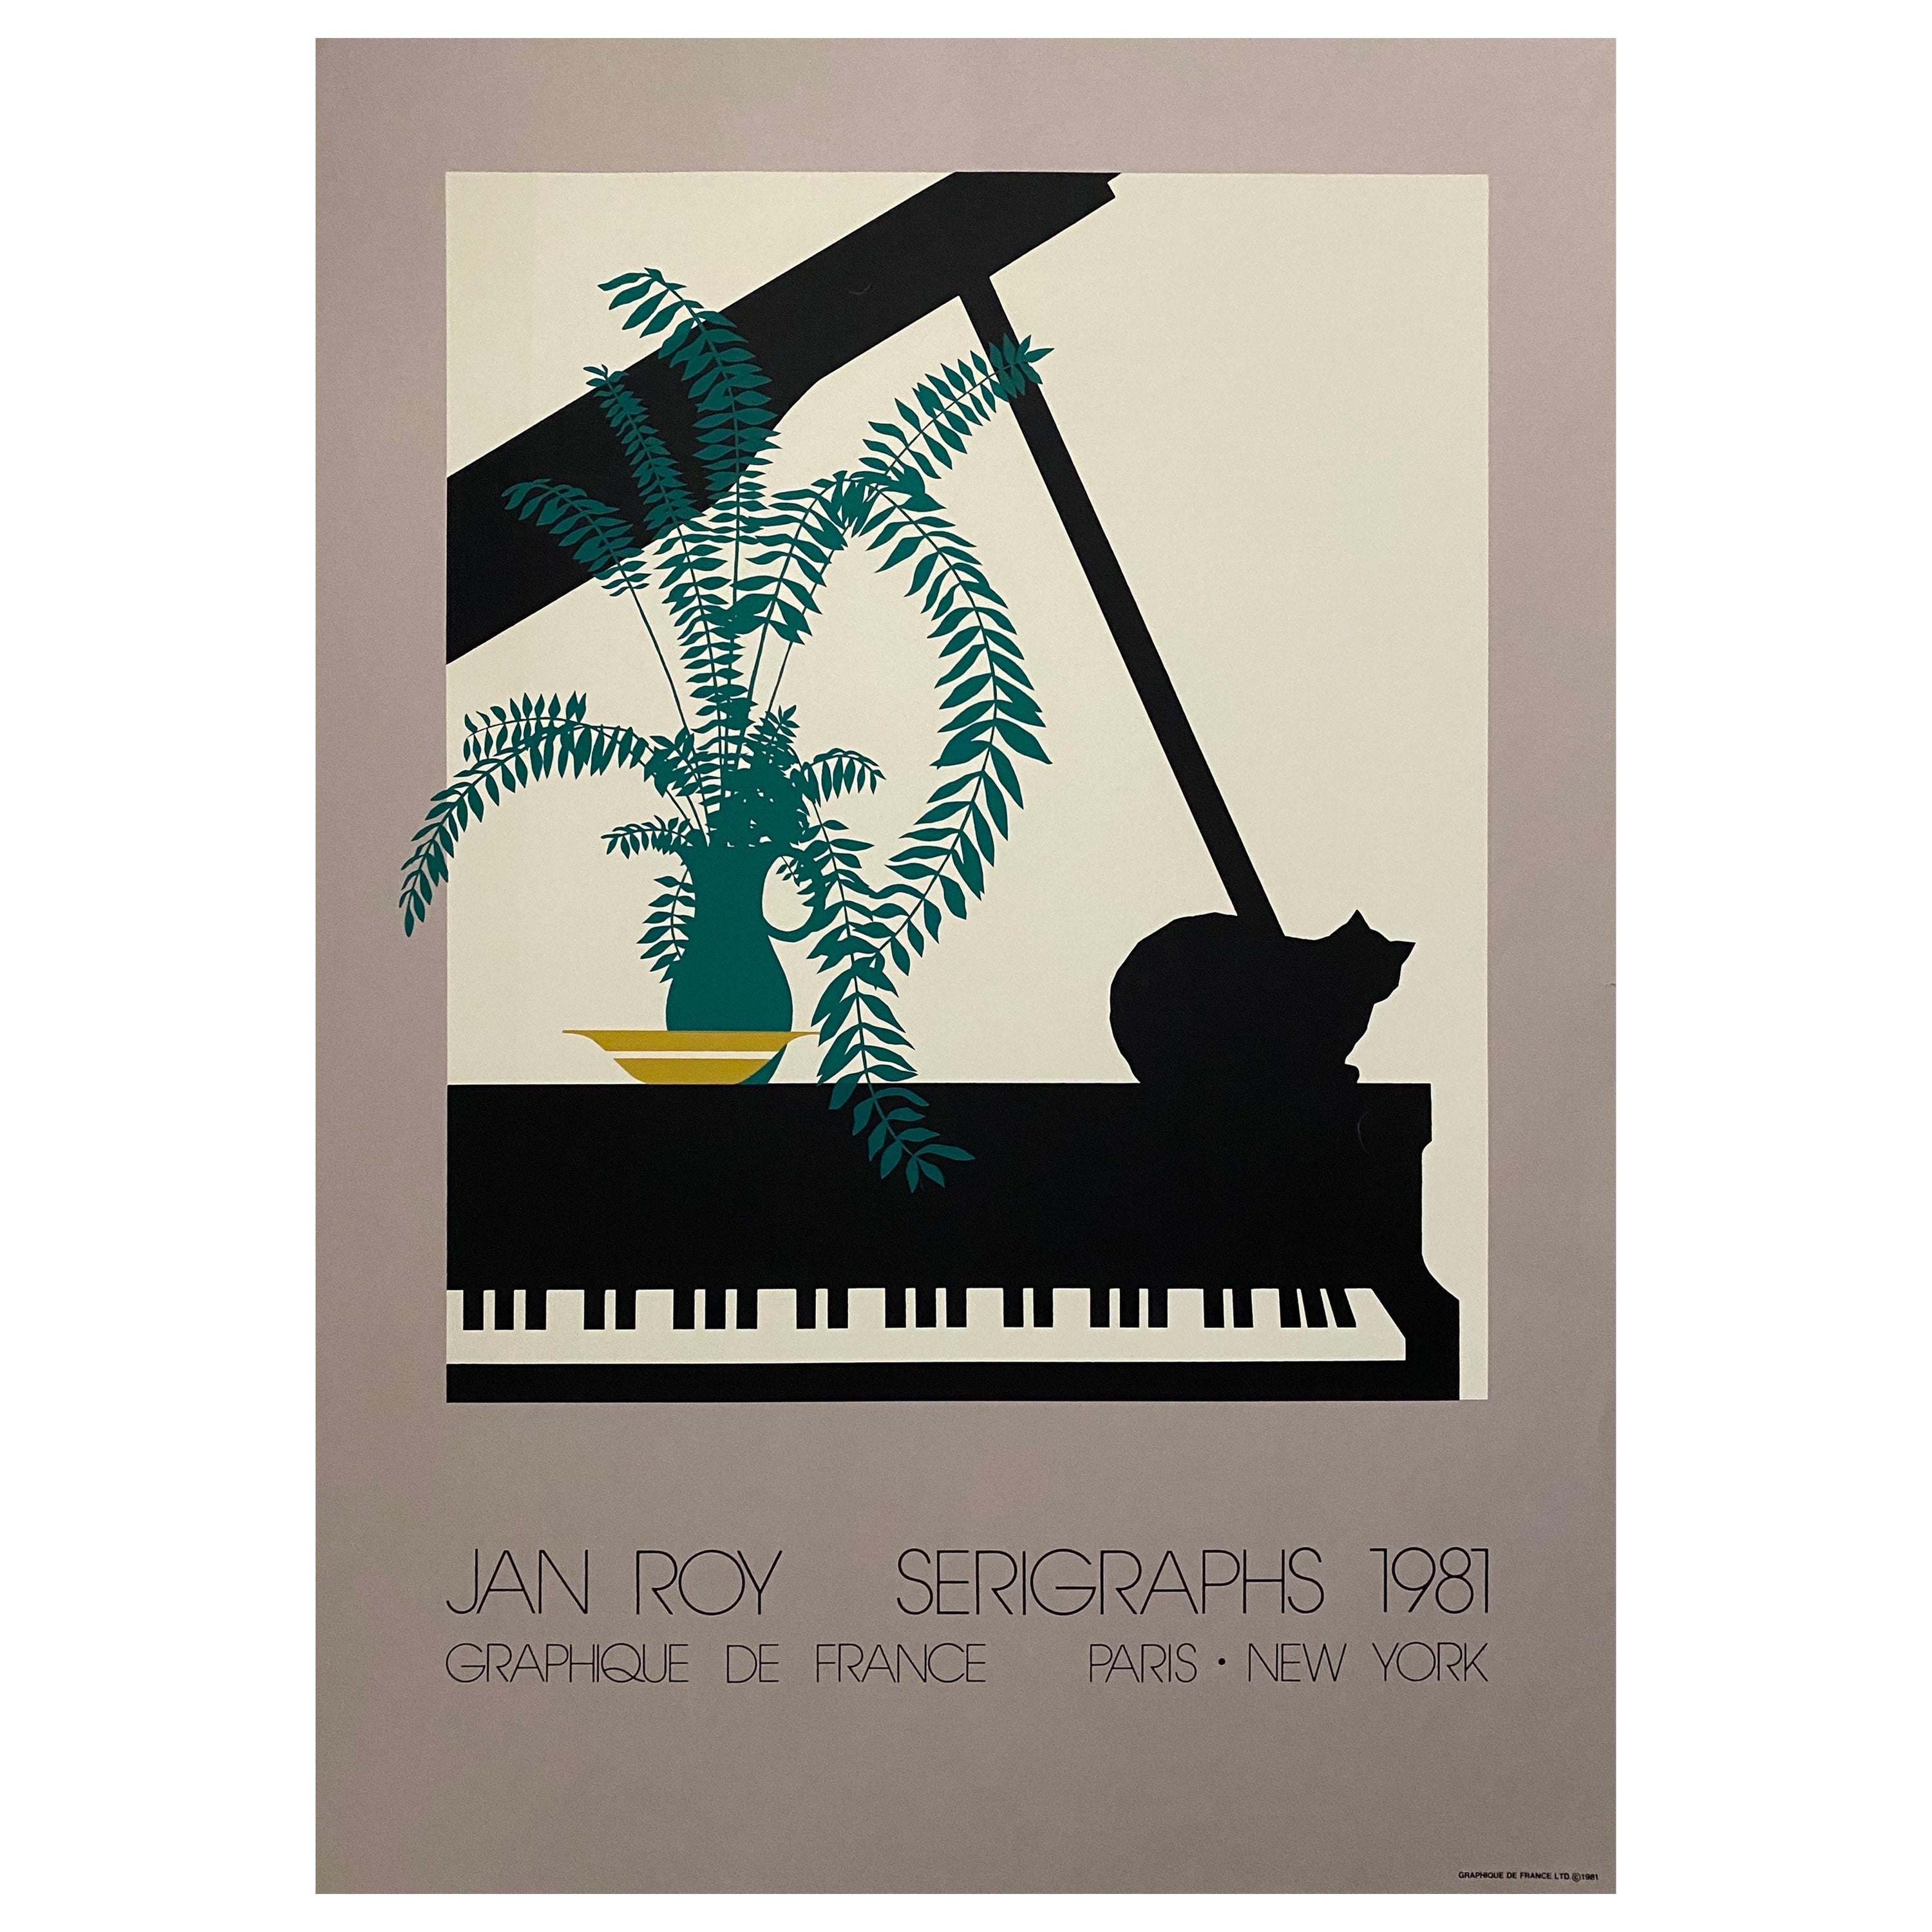 1981 Jan Roy "Cat On Piano" Silkscreen   For Sale